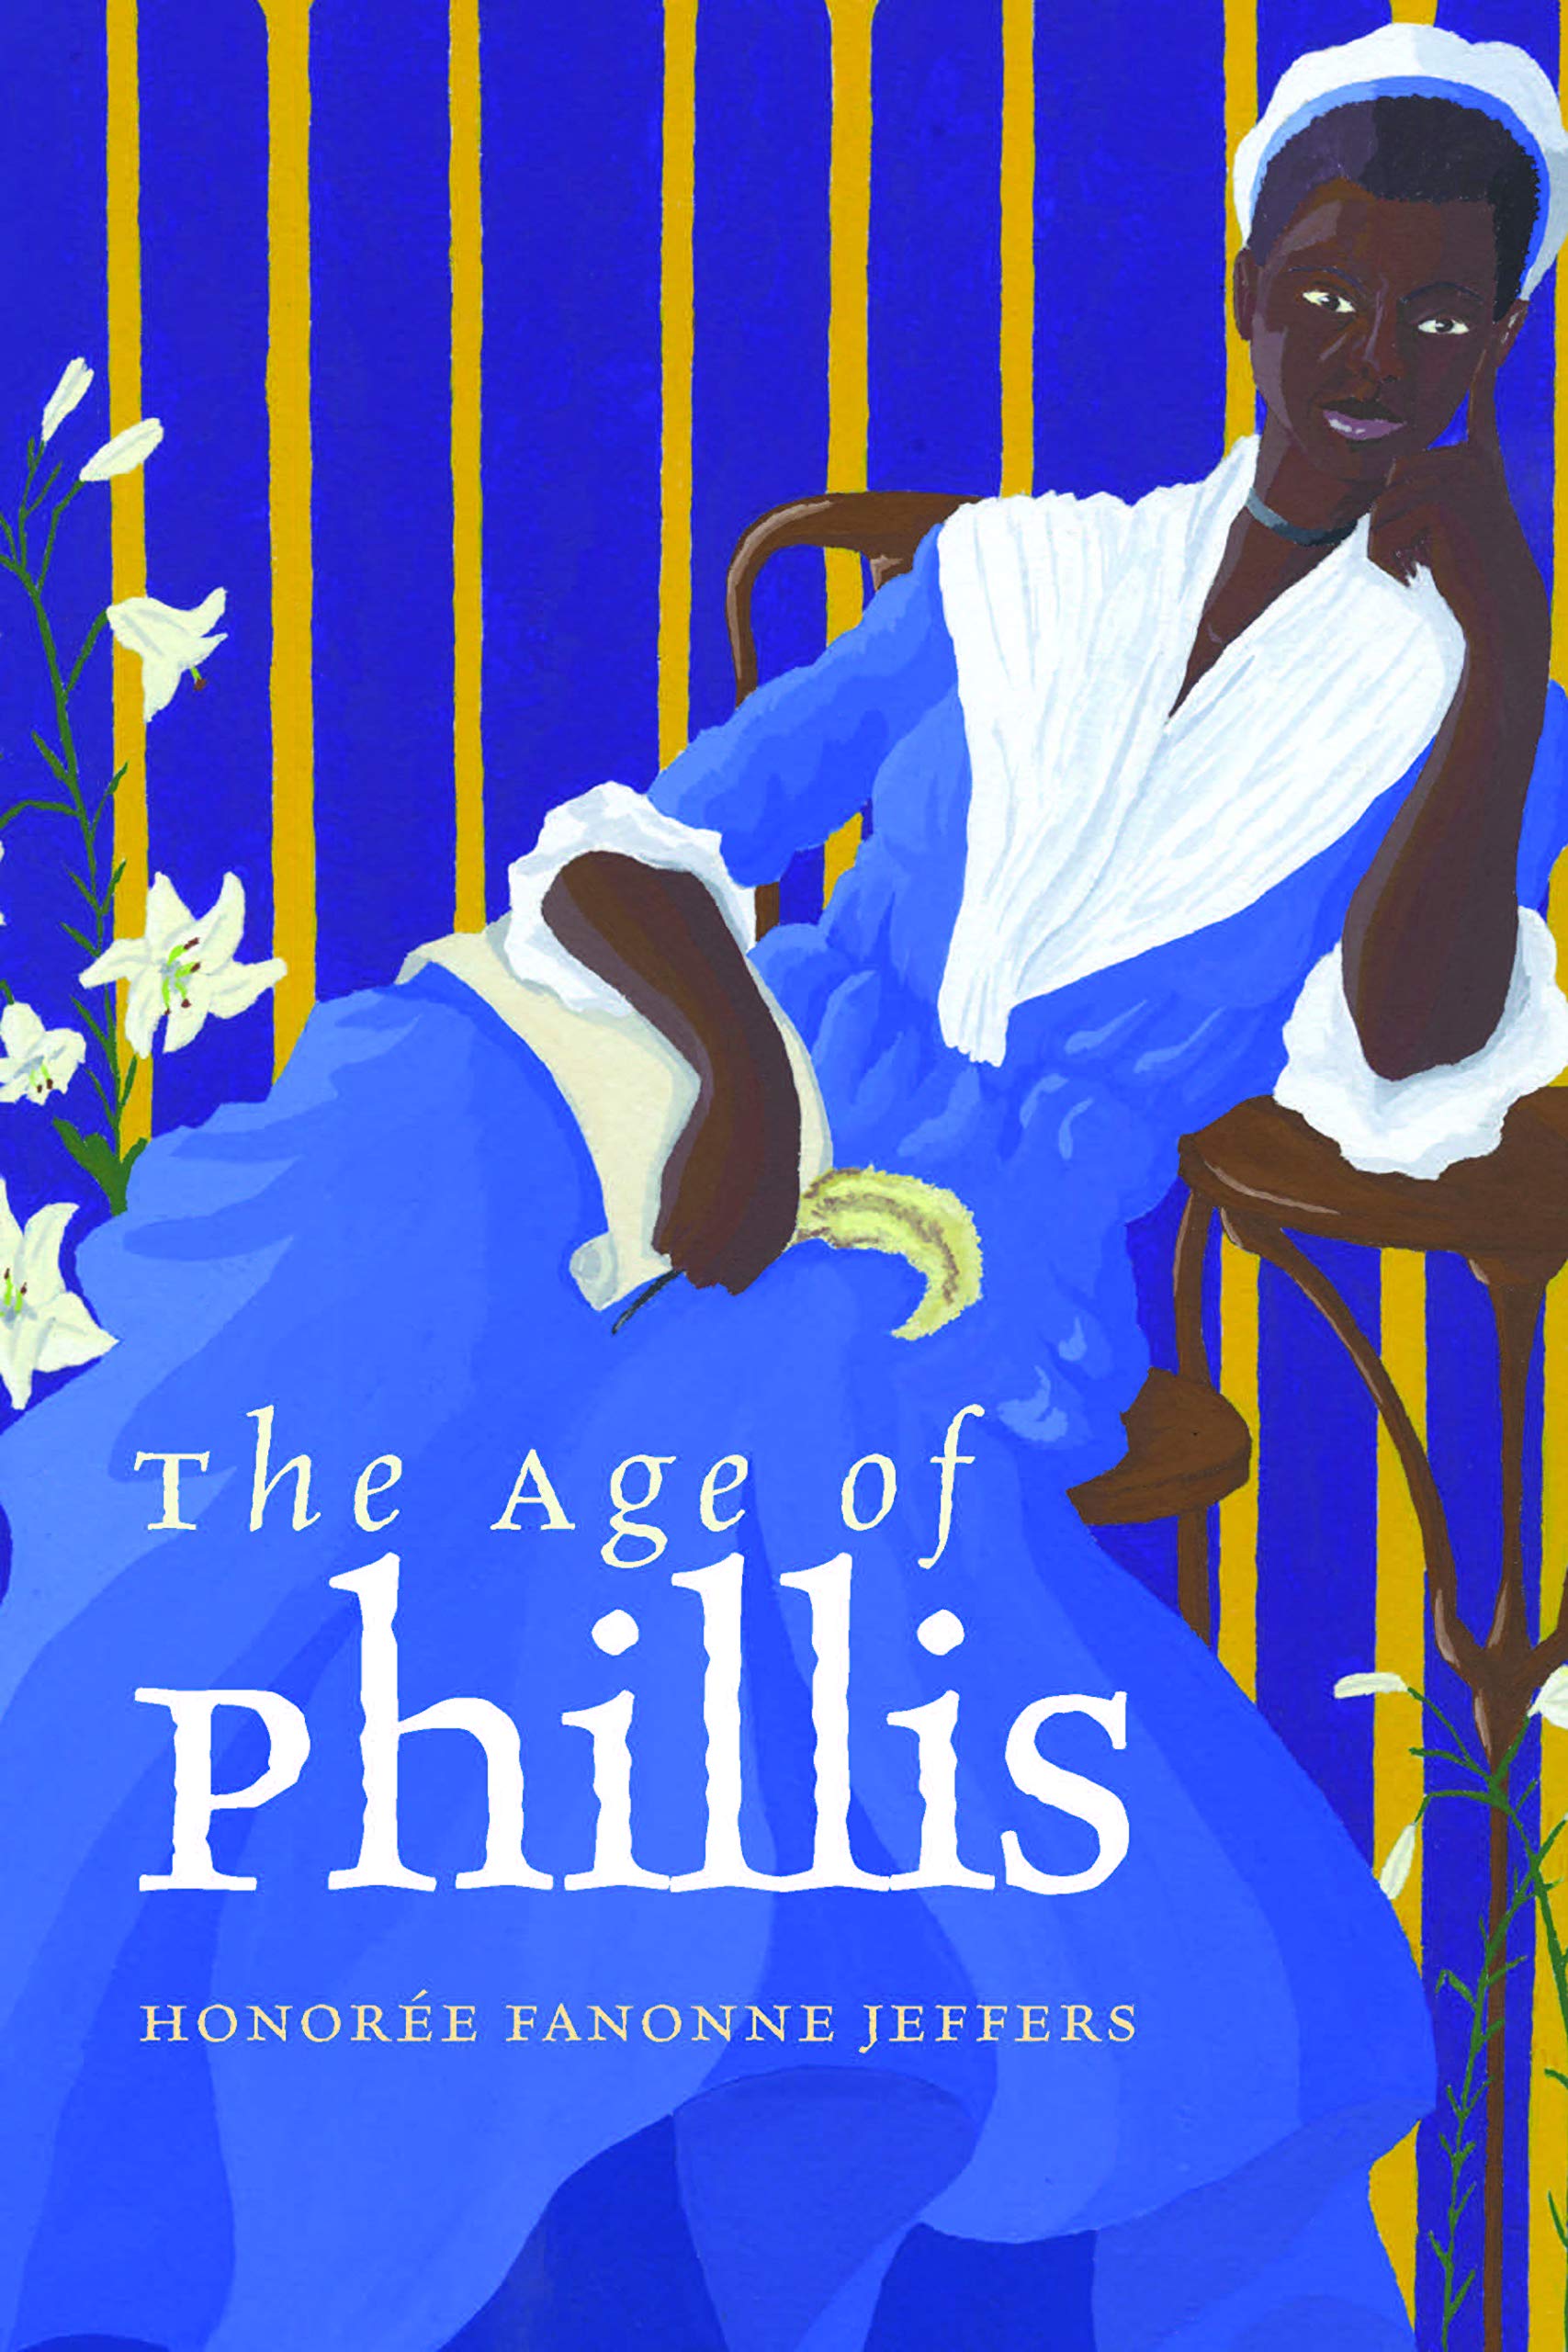 Age of Phillis book cover. Illustration of Phillis Wheatley leaning in chair wearing a blue dress and white bonnet